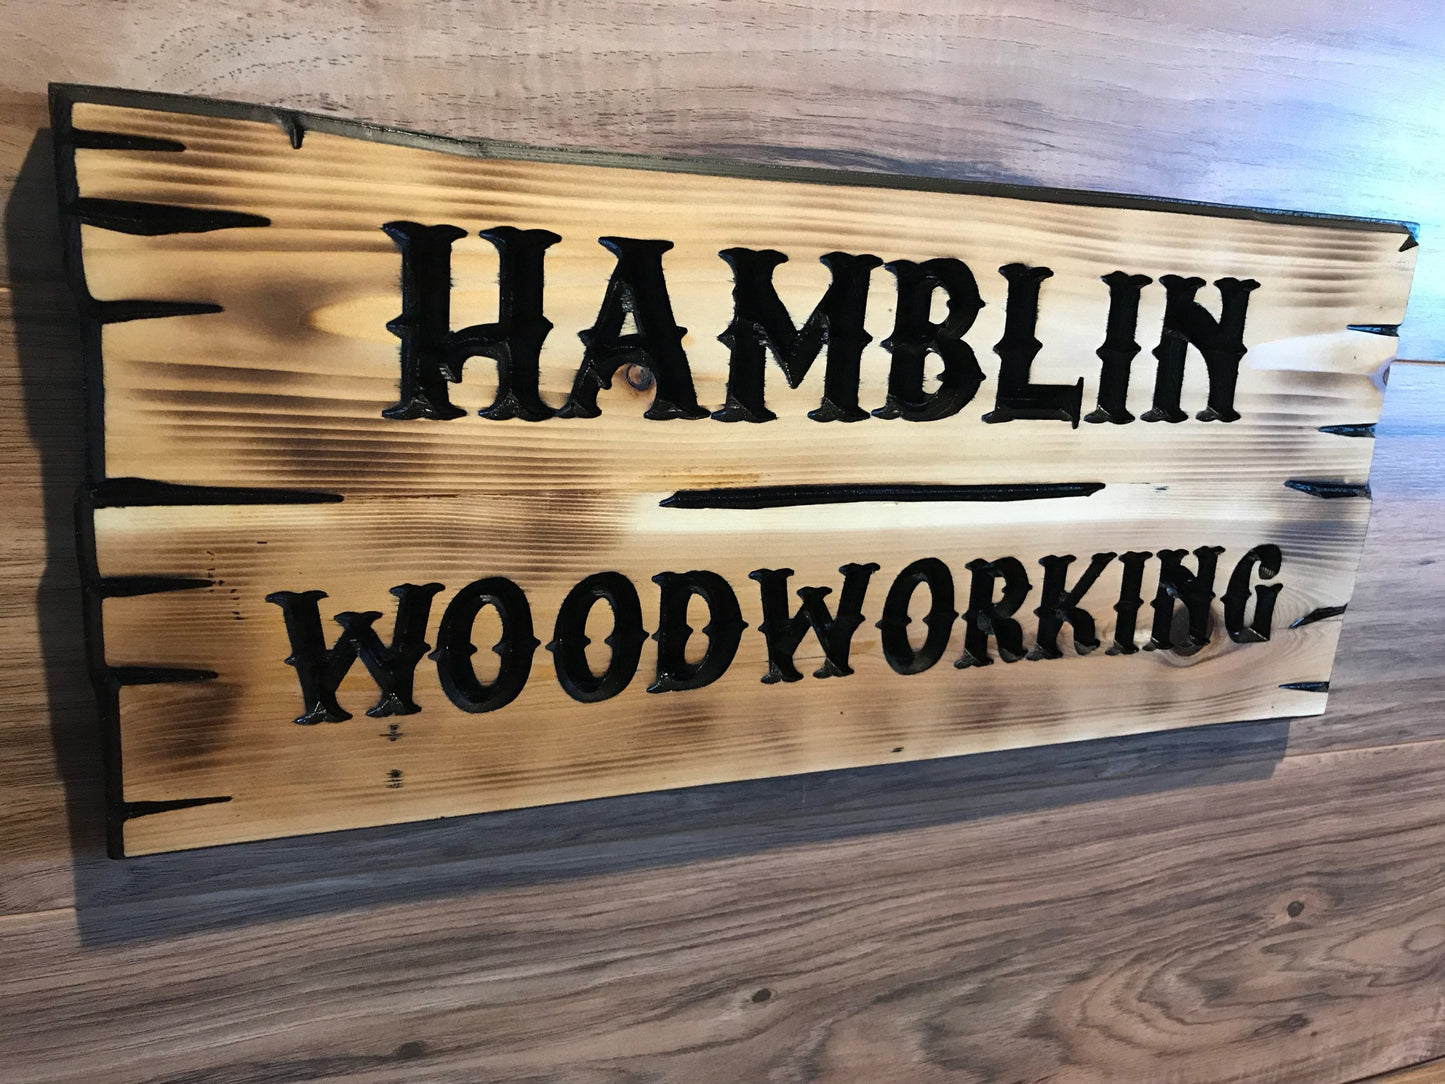 Custom Rustic Wood Signs Personalized Family Sign Garage Workshop Wedding Gift Anniversary Housewarming Birthday Fathers Day Mothers Day